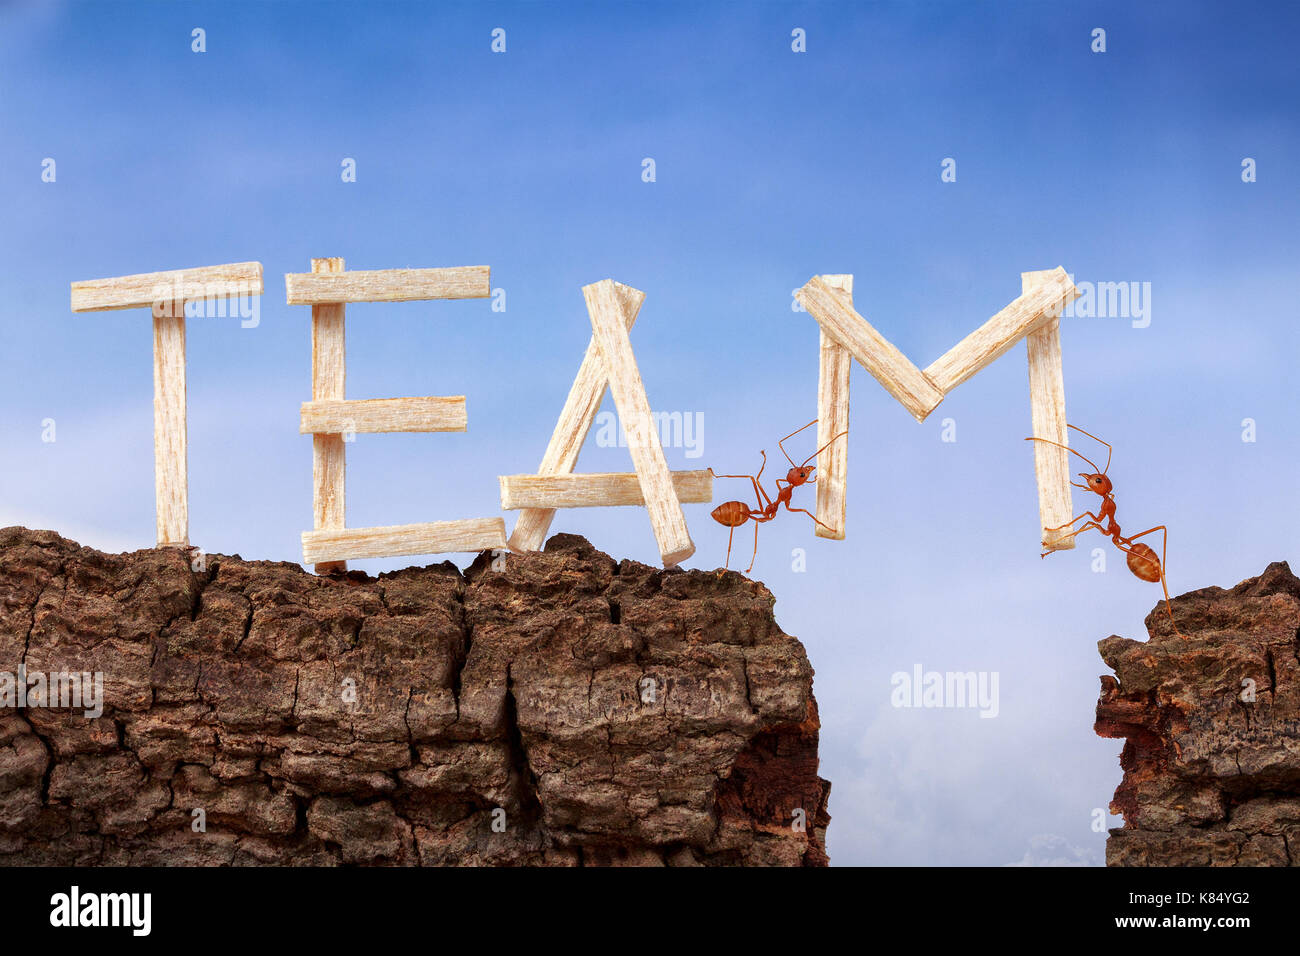 Ants carry word team across wooden cliff with sky background, teamwork concept Stock Photo